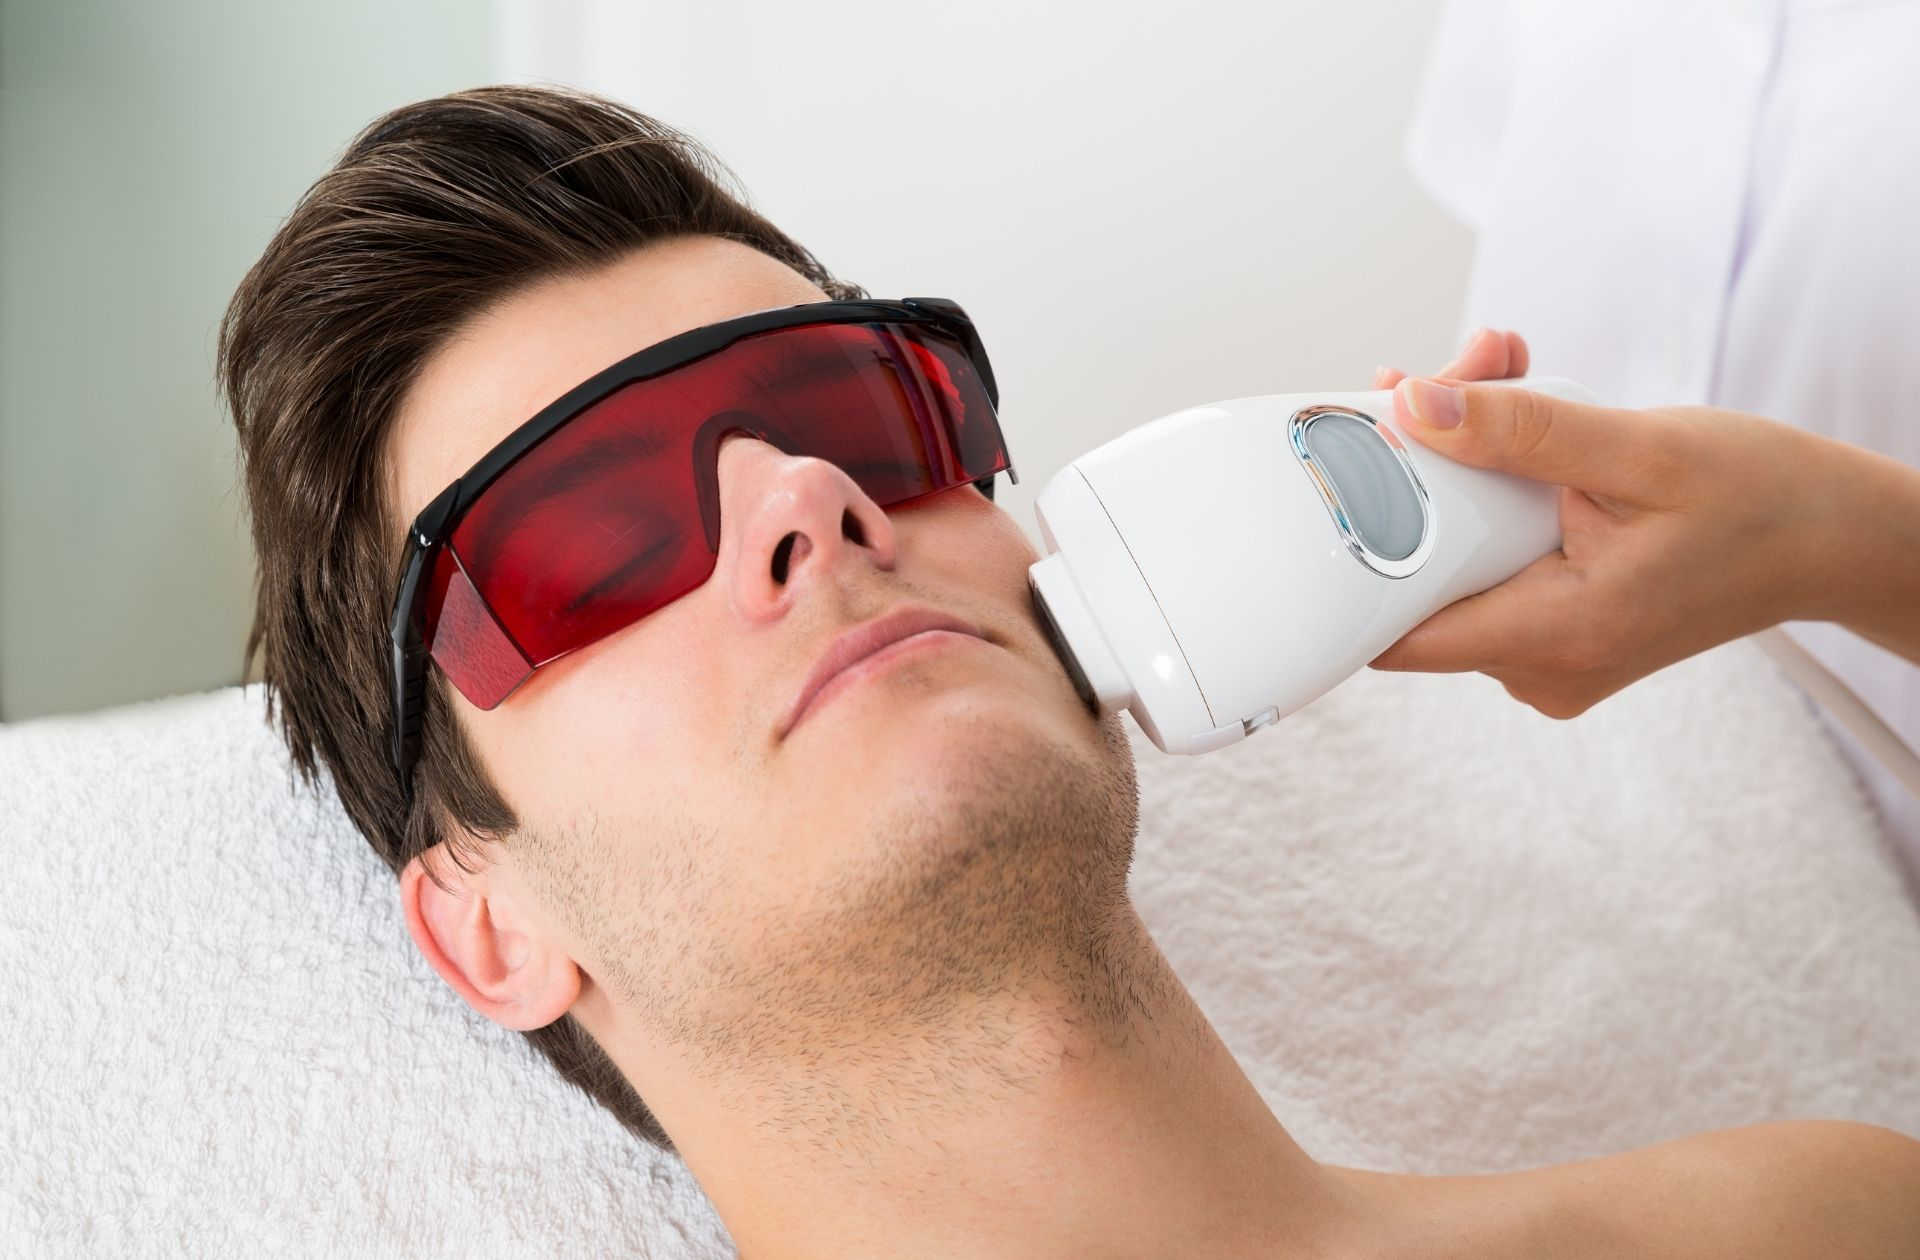 Laser Hair Removal for the Face - Man Mid Treatment - Pure Skin Beauty